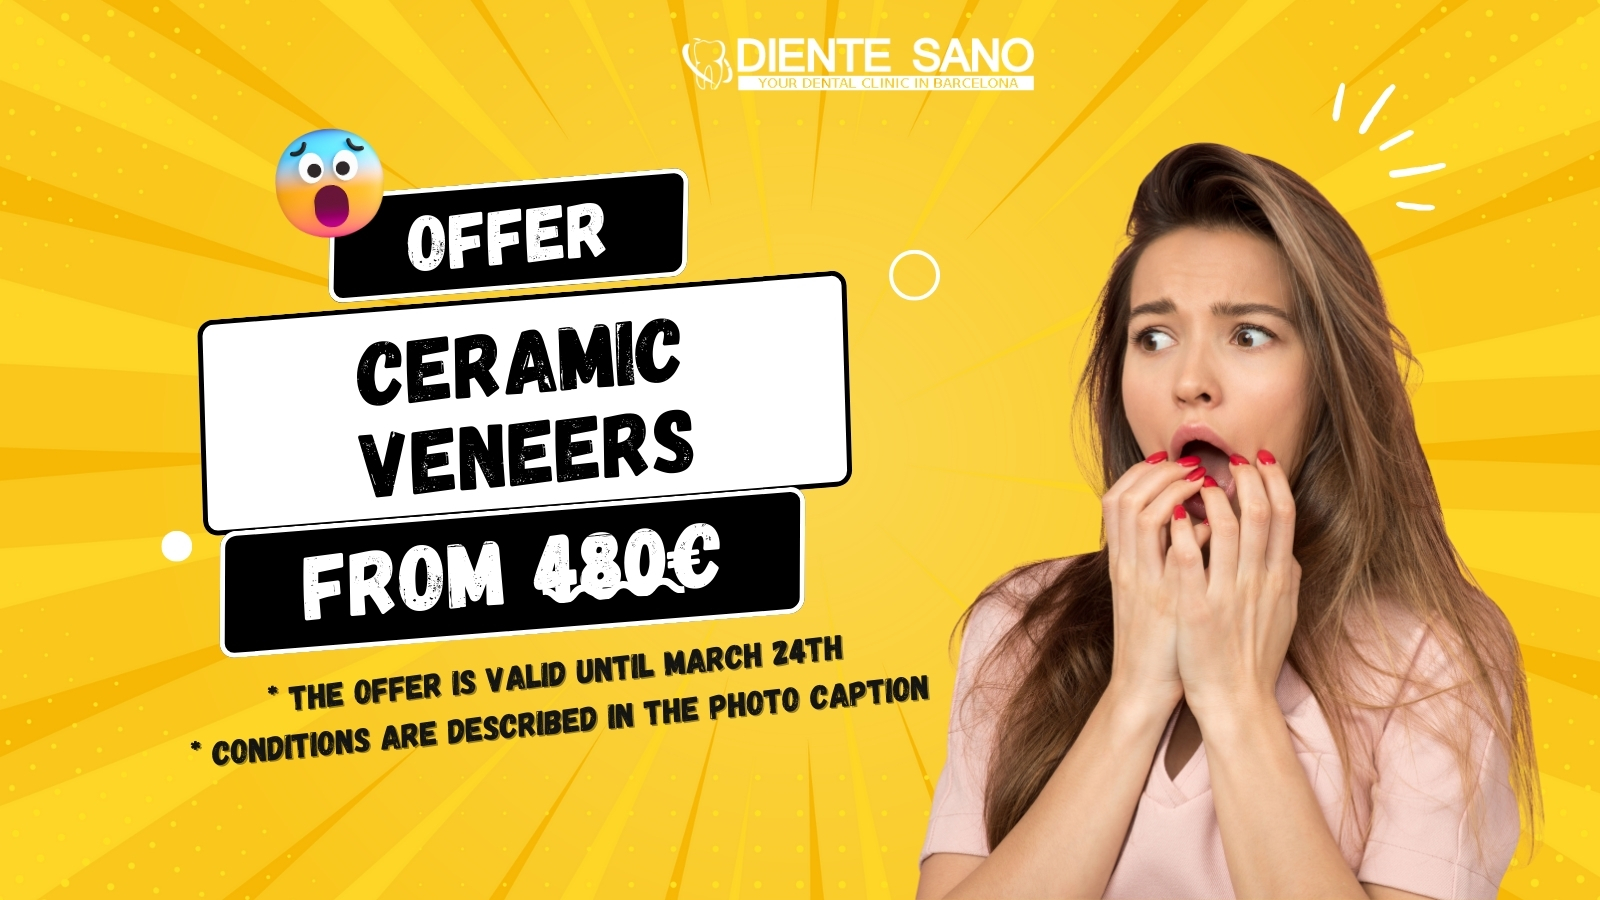 Discover the secret to a perfect smile with the exclusive offer from Diente Sano Dental Clinic in Barcelona! We are pleased to present to you ceramic veneers at a special price starting from 480 euros. This is your chance to achieve a flawless appearance of your teeth, correct minor defects, and give your smile the desired whiteness and shape.